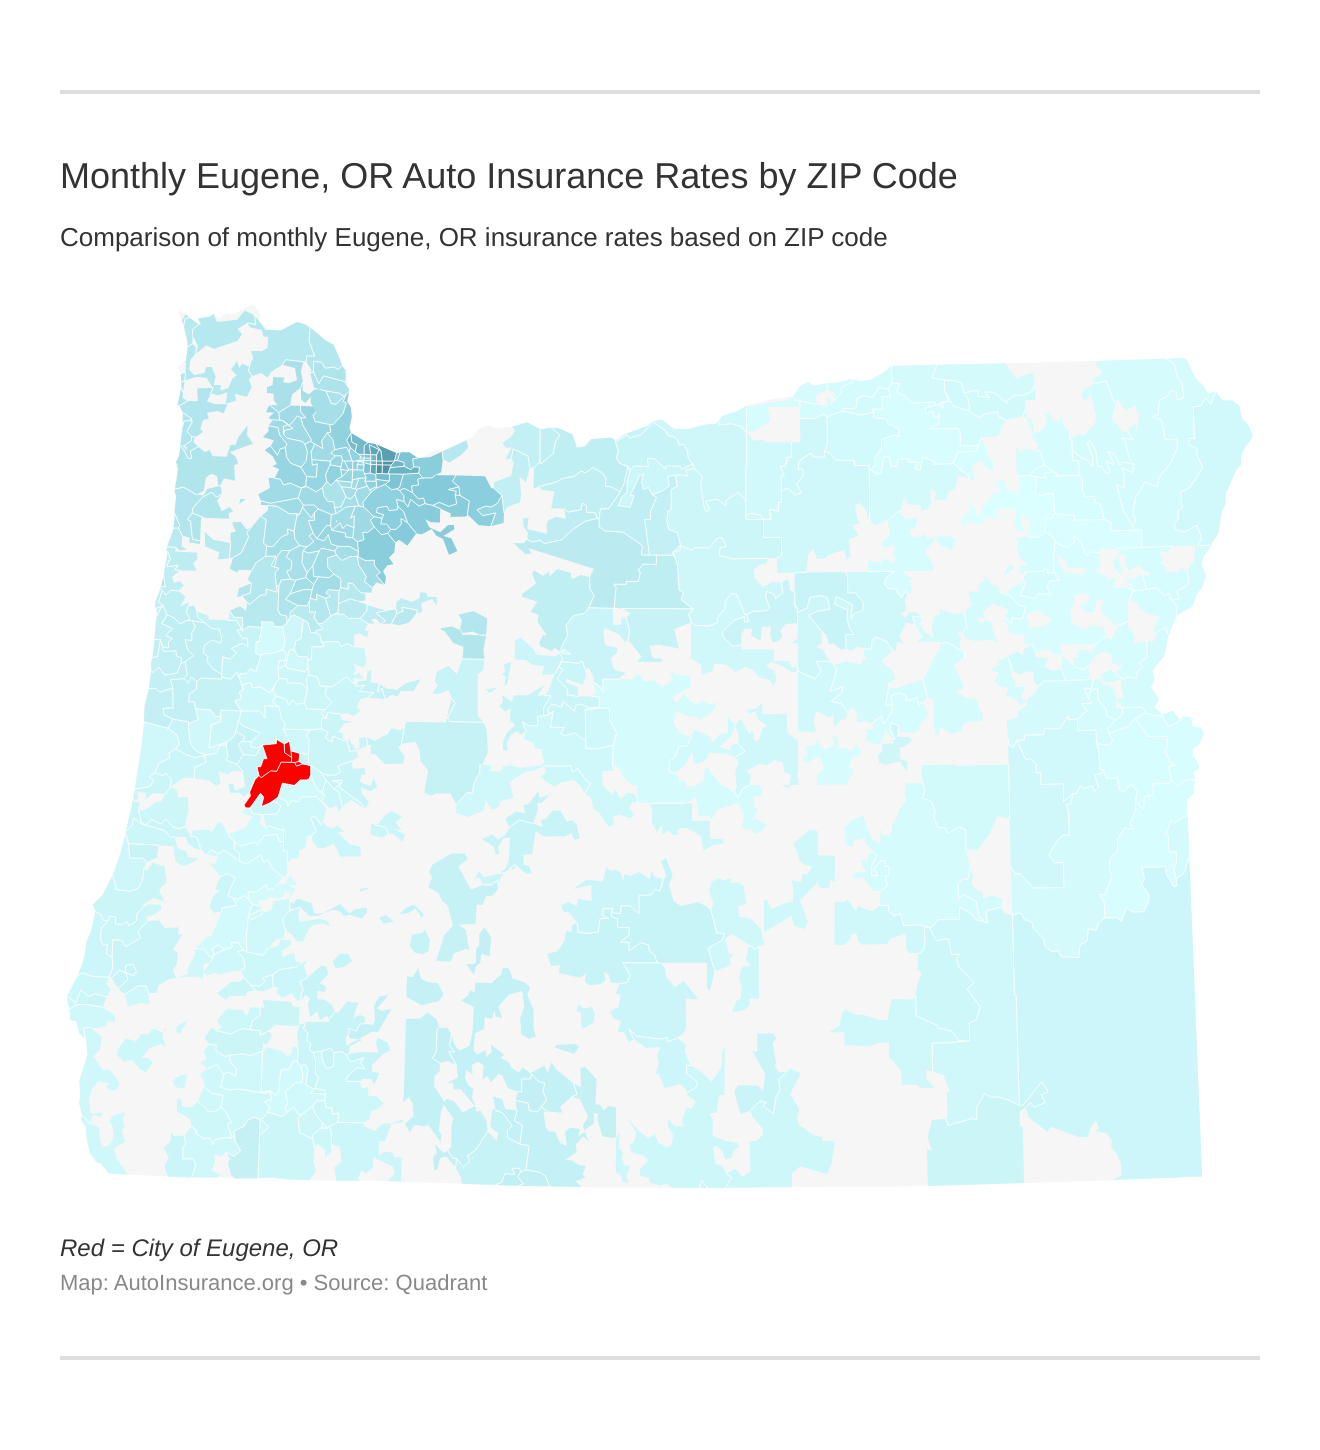 Monthly Eugene, OR Auto Insurance Rates by ZIP Code